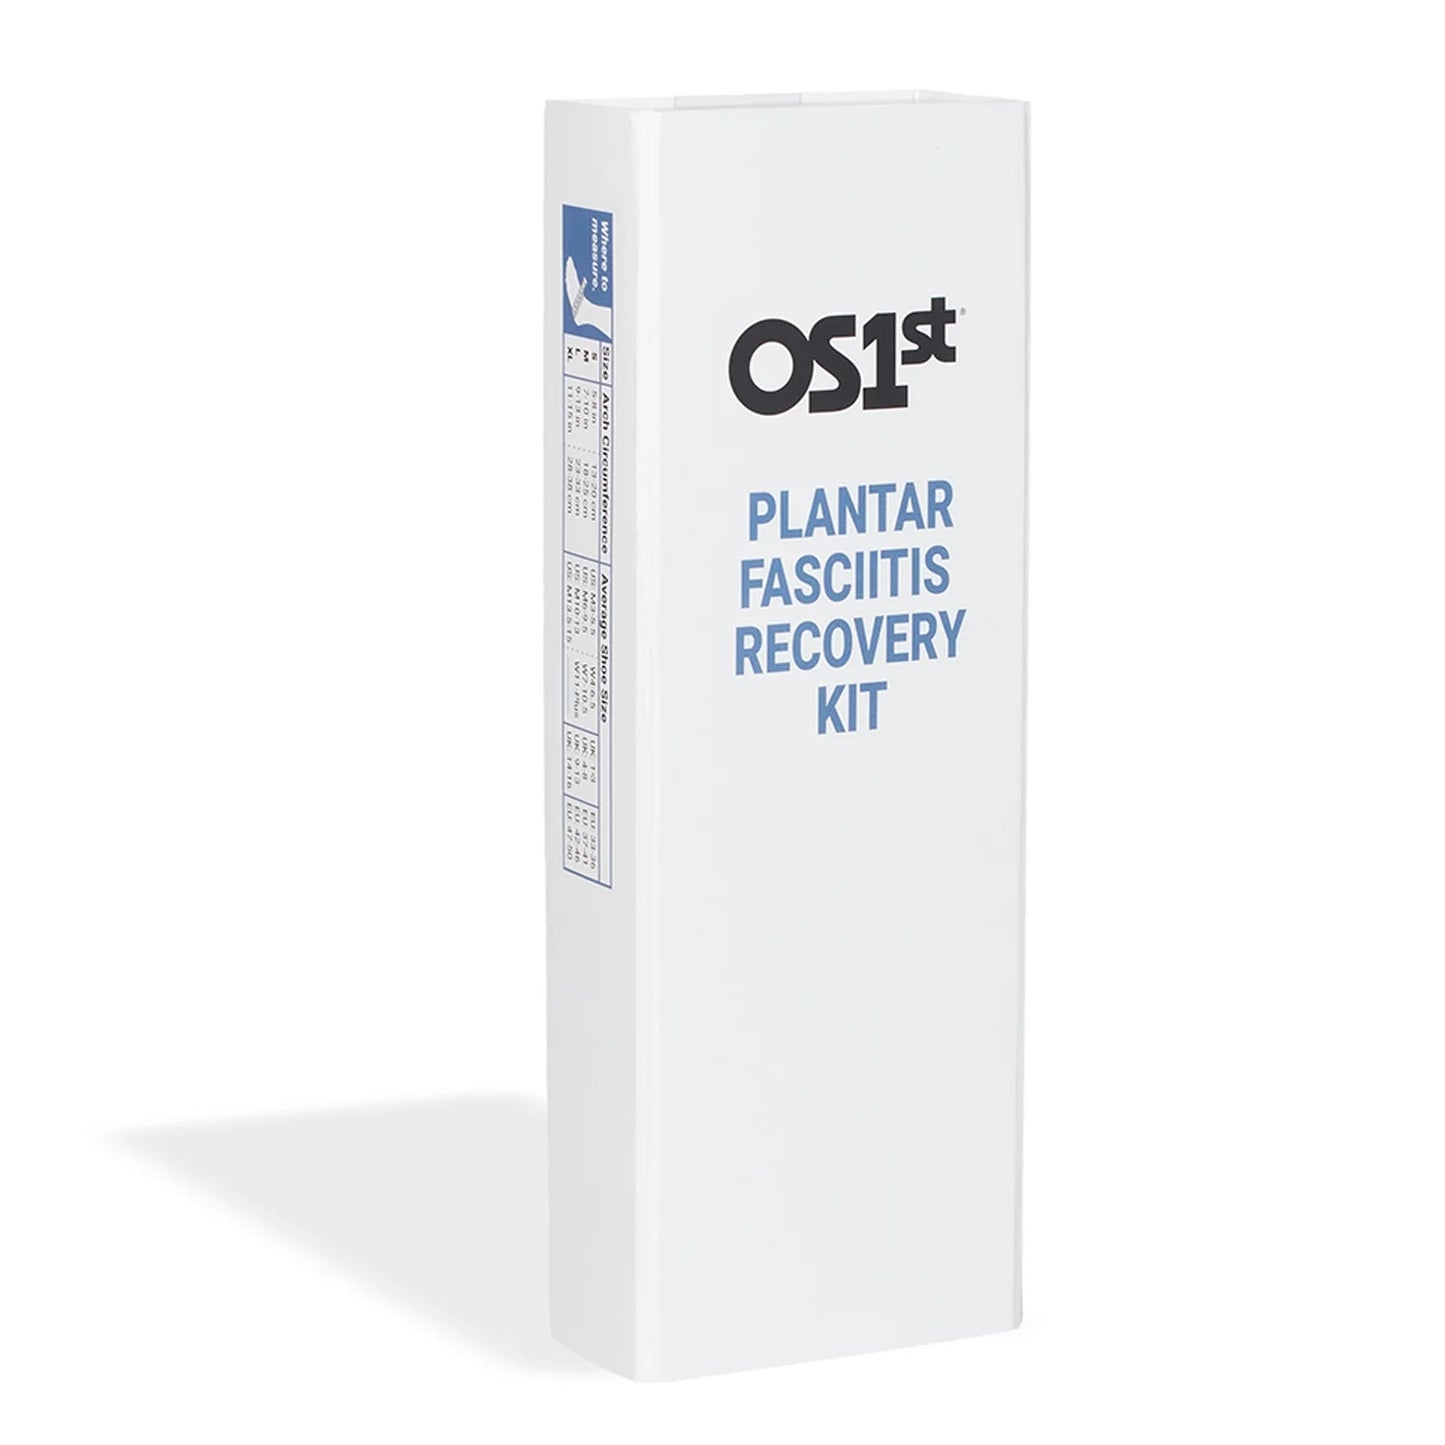 OS1st Plantar Fasciitis Recovery Kit